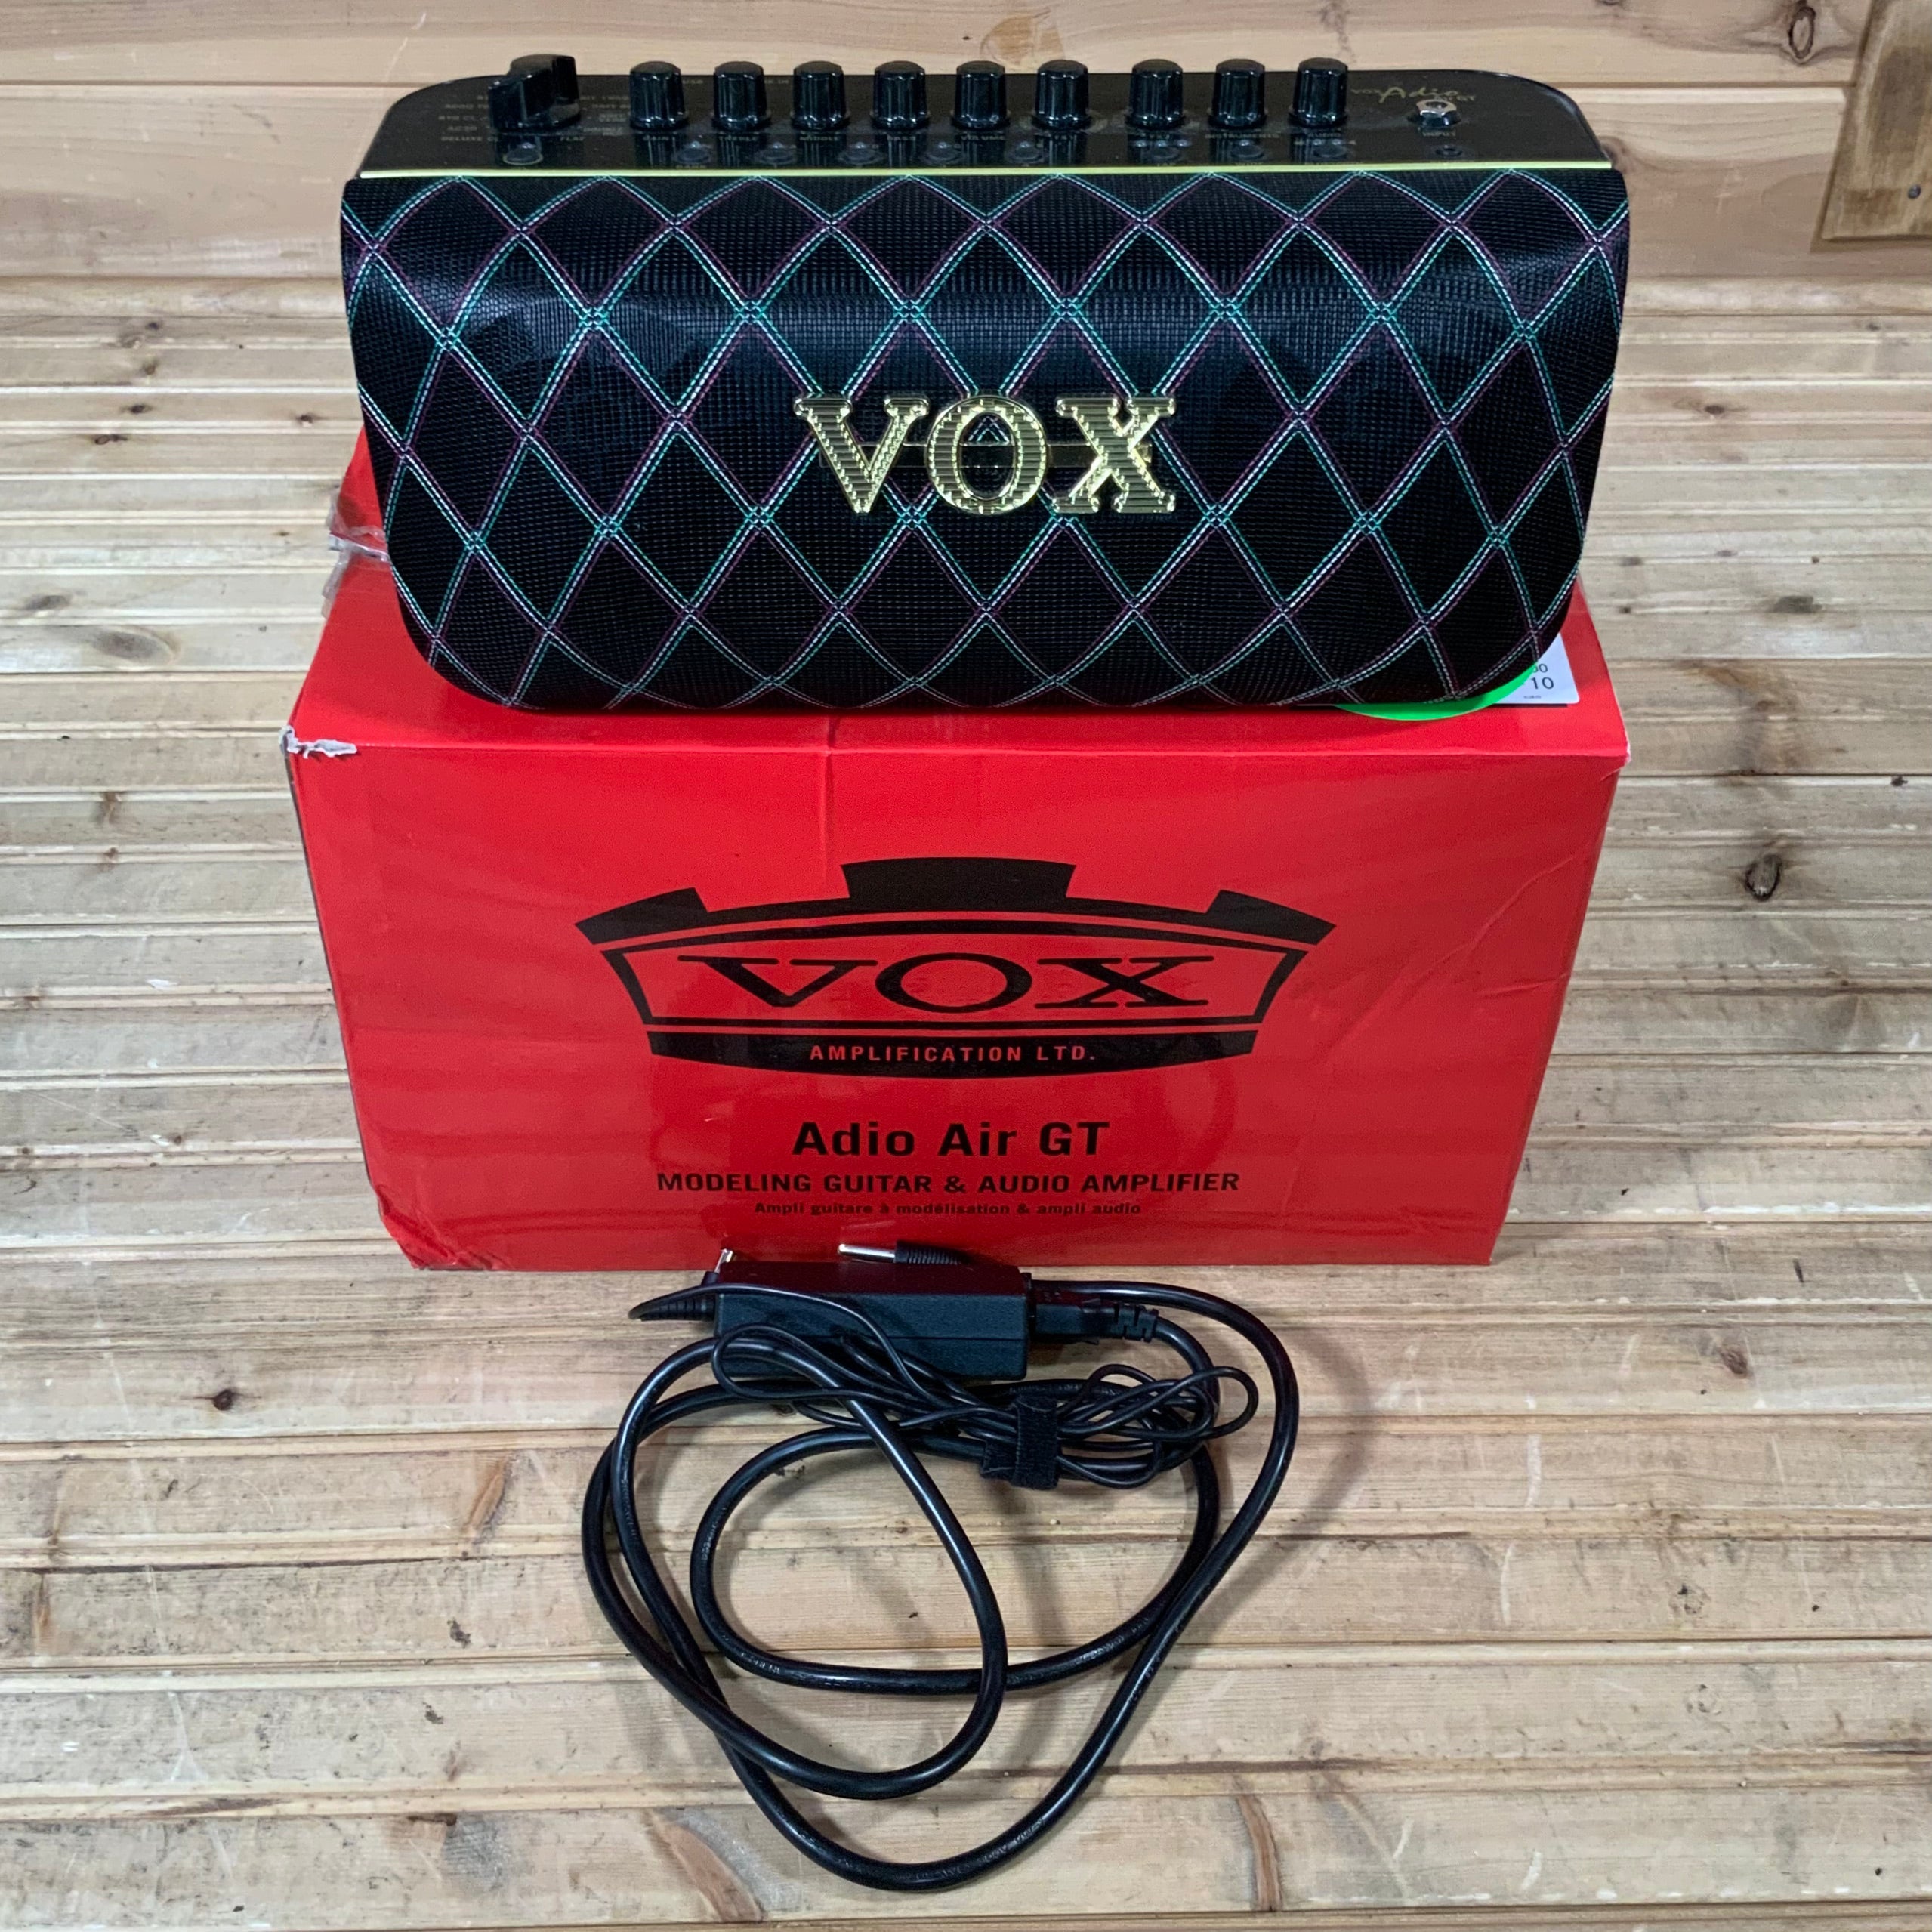 Vox Adio Air GT 50W 2x3 Bluetooth Modeling Guitar Combo Amplifier USED